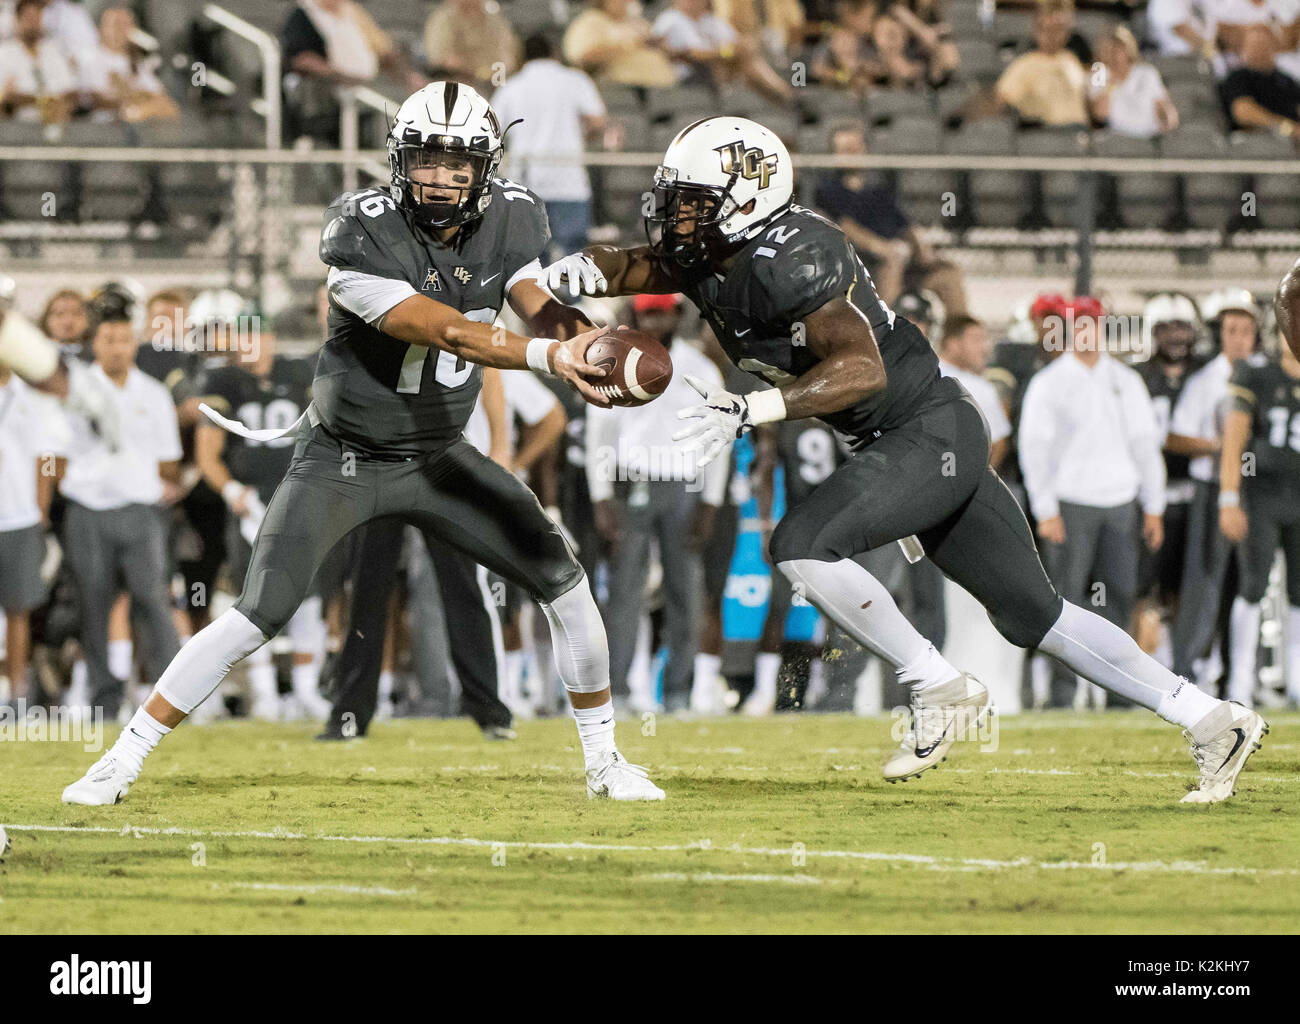 August 31, 2017 - Orlando, FL, U.S: UCF Knights quarterback Noah Vedral (16) hands the ball off to UCF Knights running back Taj McGowan (12) during NCAA football game between FIU Golden Panthers and the UCF Knights at Spectrum Stadium in Orlando, Fl. Romeo T Guzman/CSM. Stock Photo